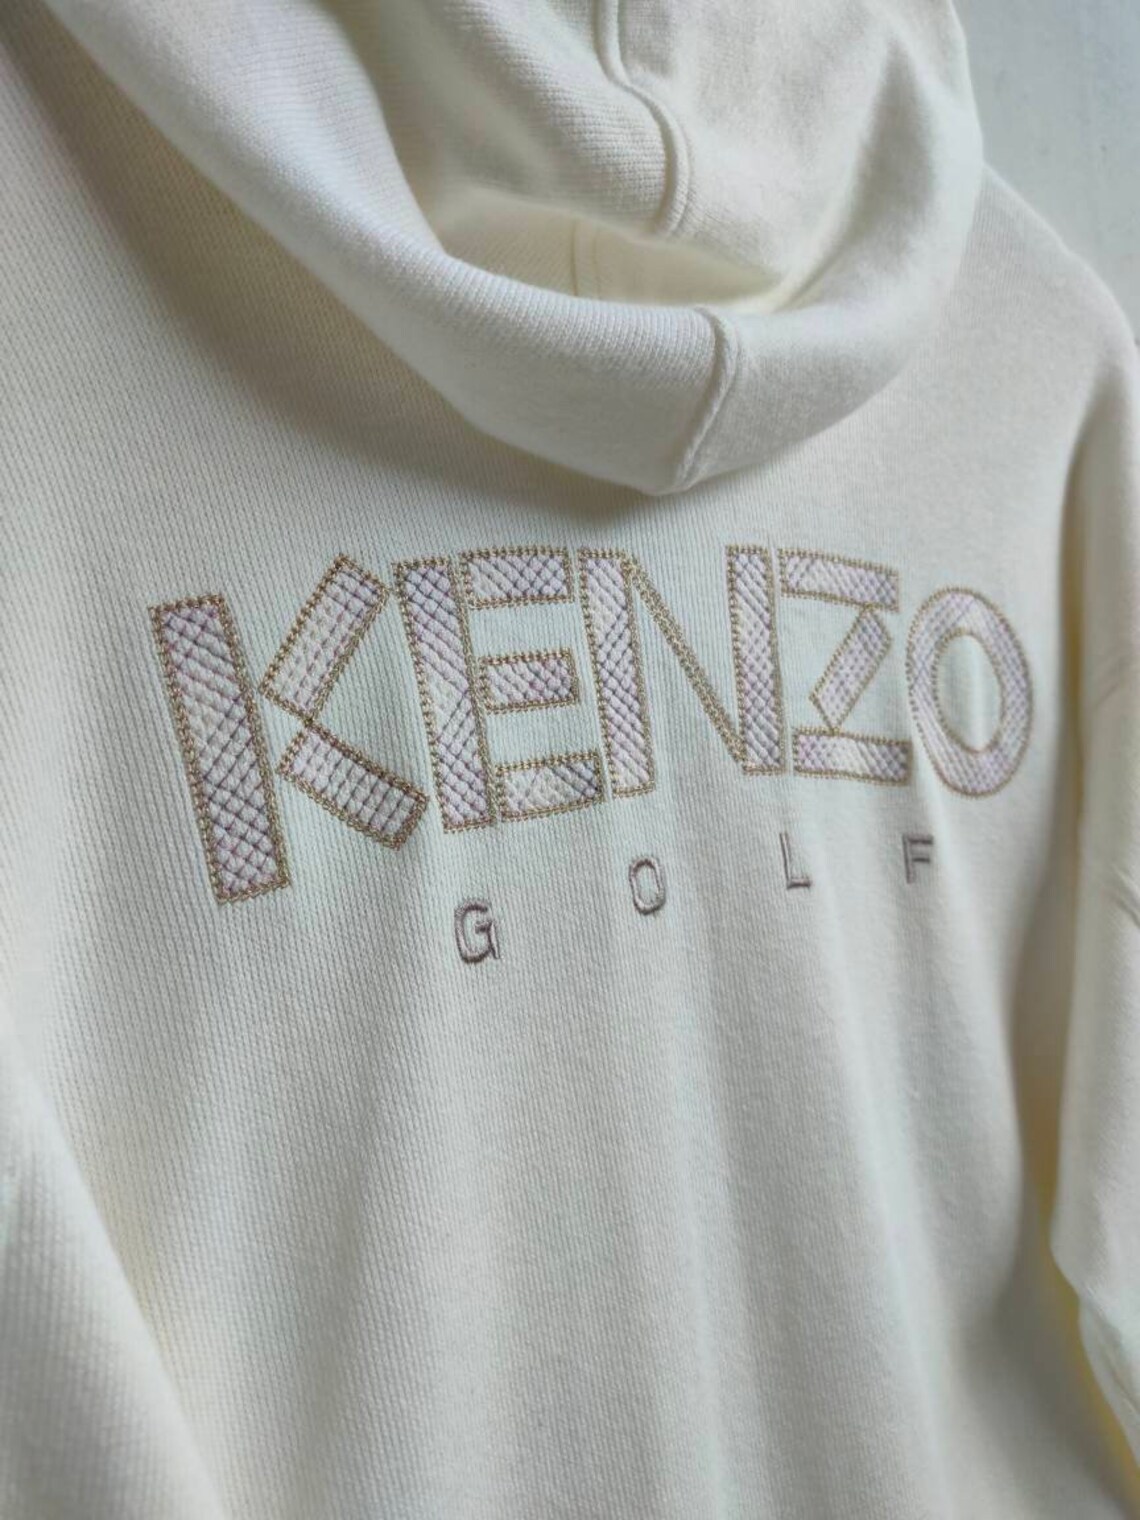 RARE Vintage Kenzo Golf Hoodie Sweater Full Zipper Embroidery | Etsy